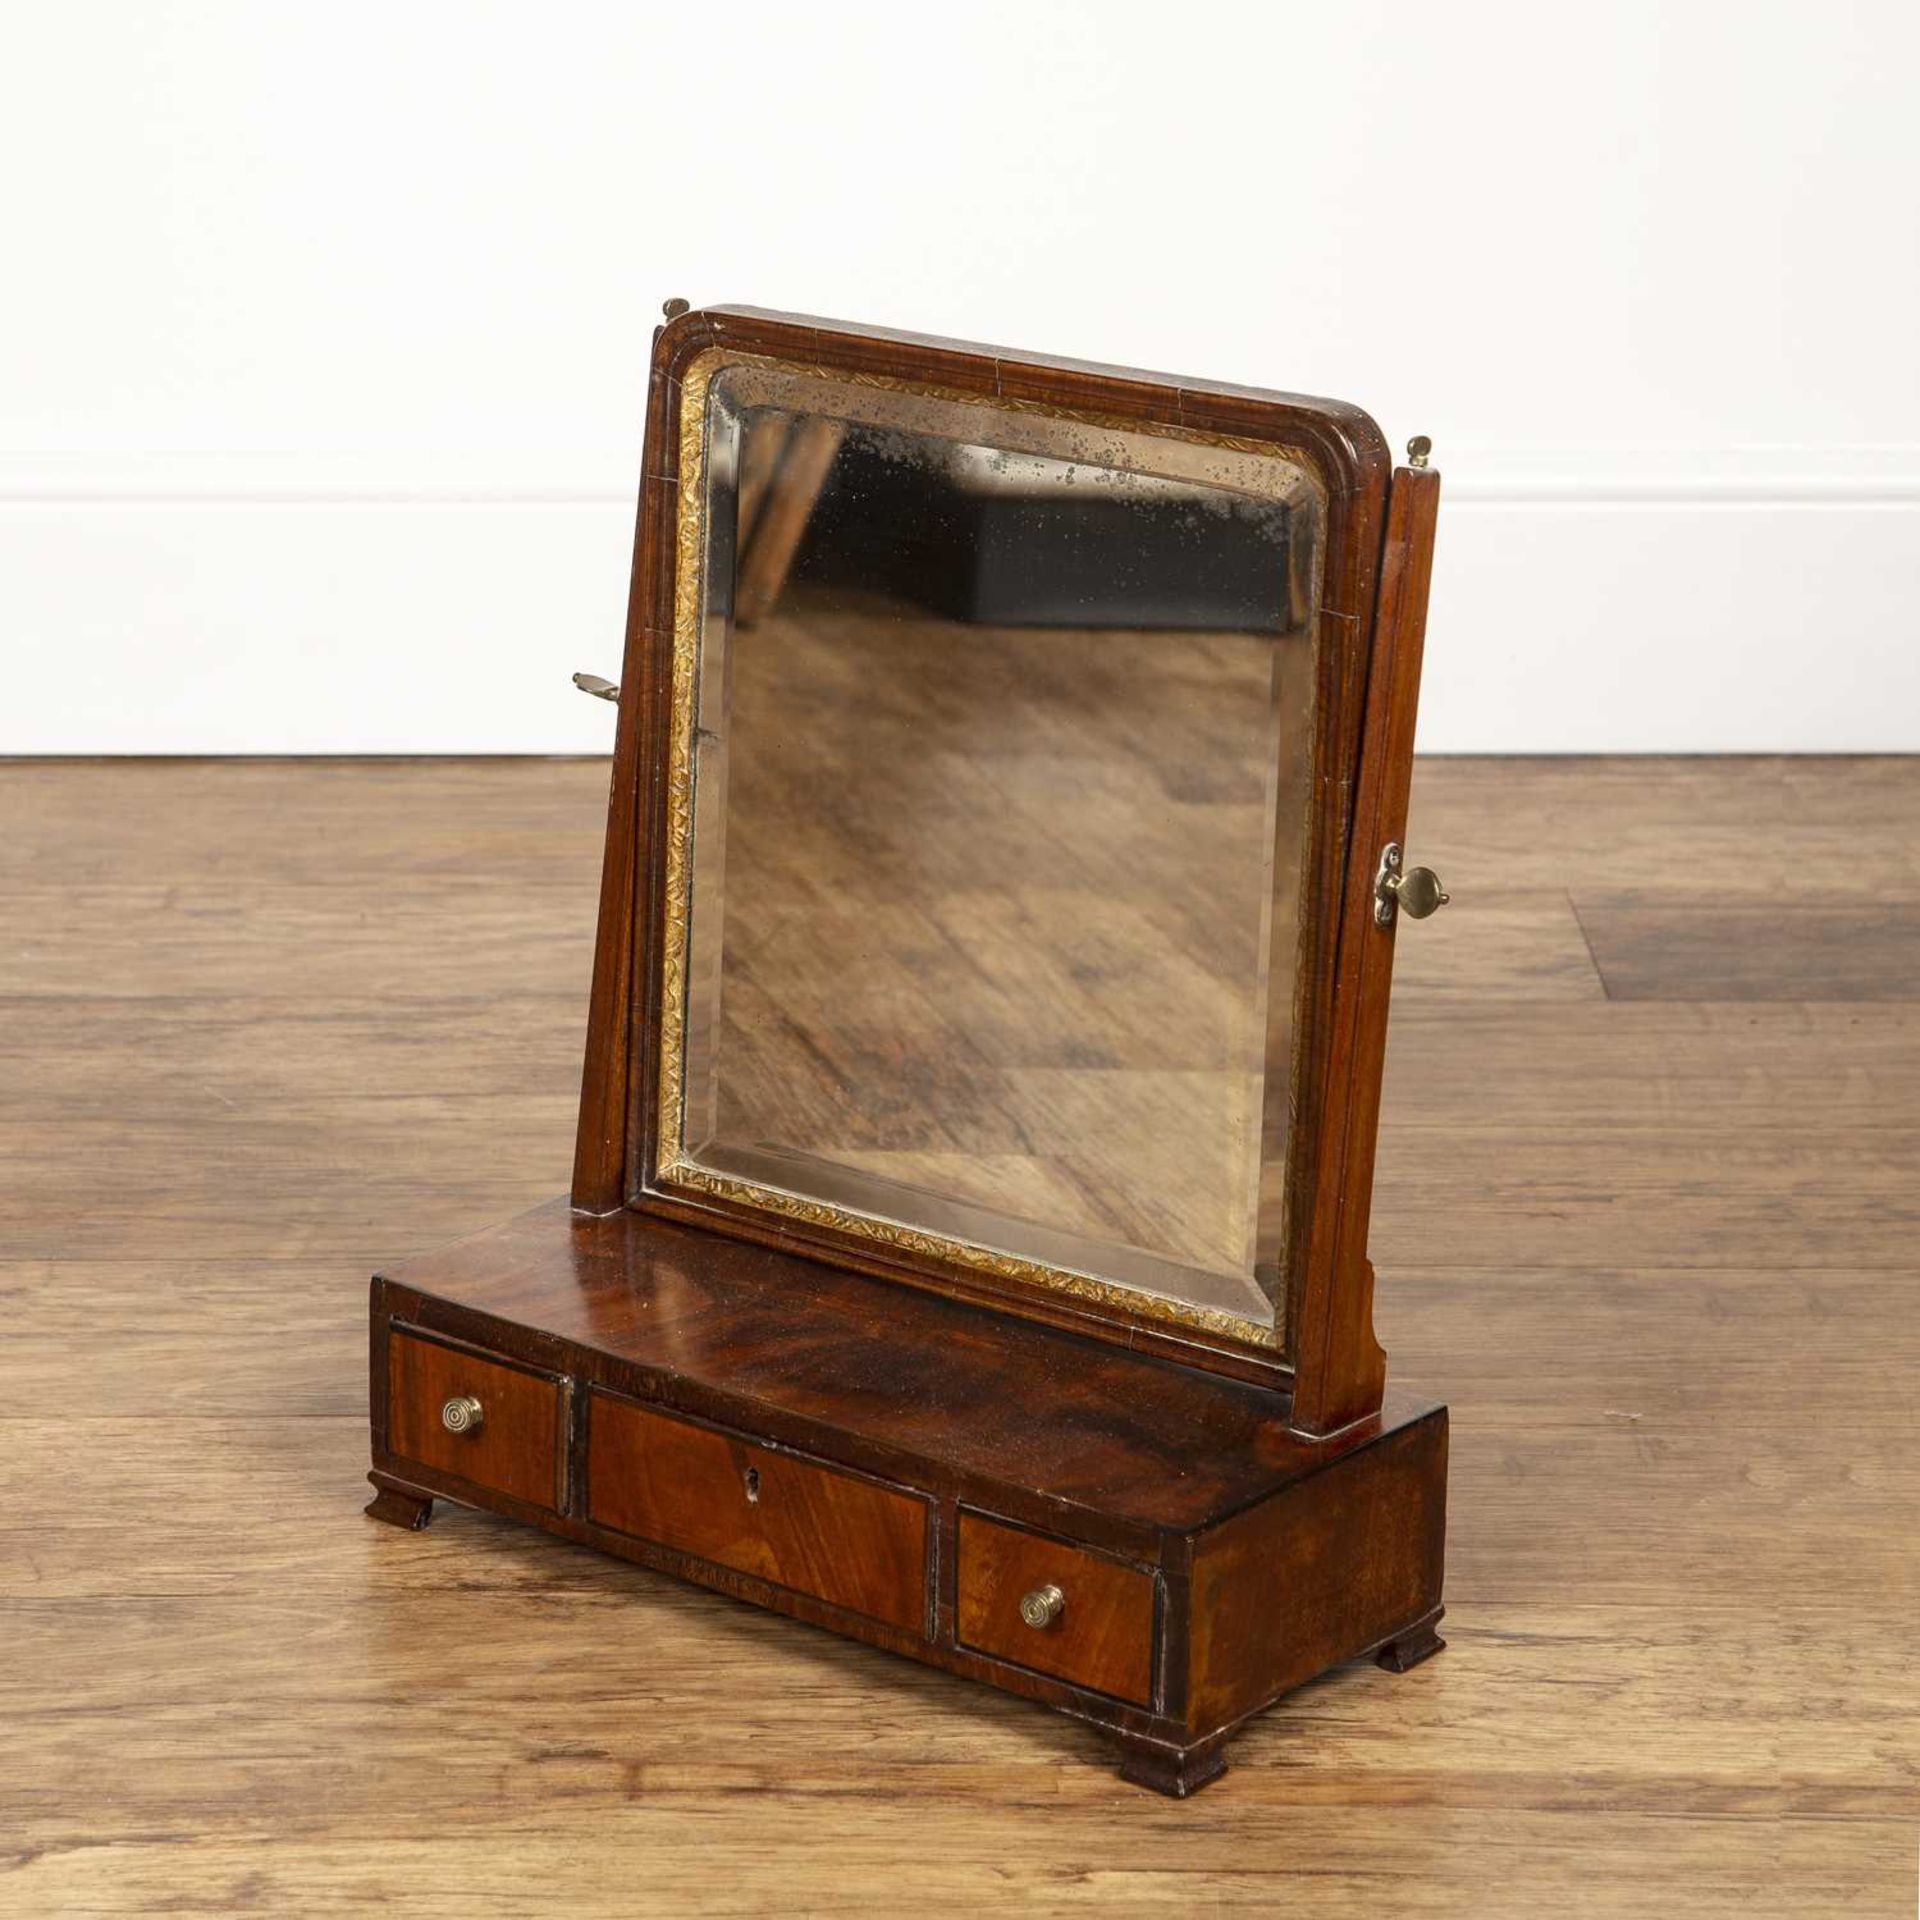 Mahogany dressing table or toilet mirror George III, with bevelled edge mirror plate, the base